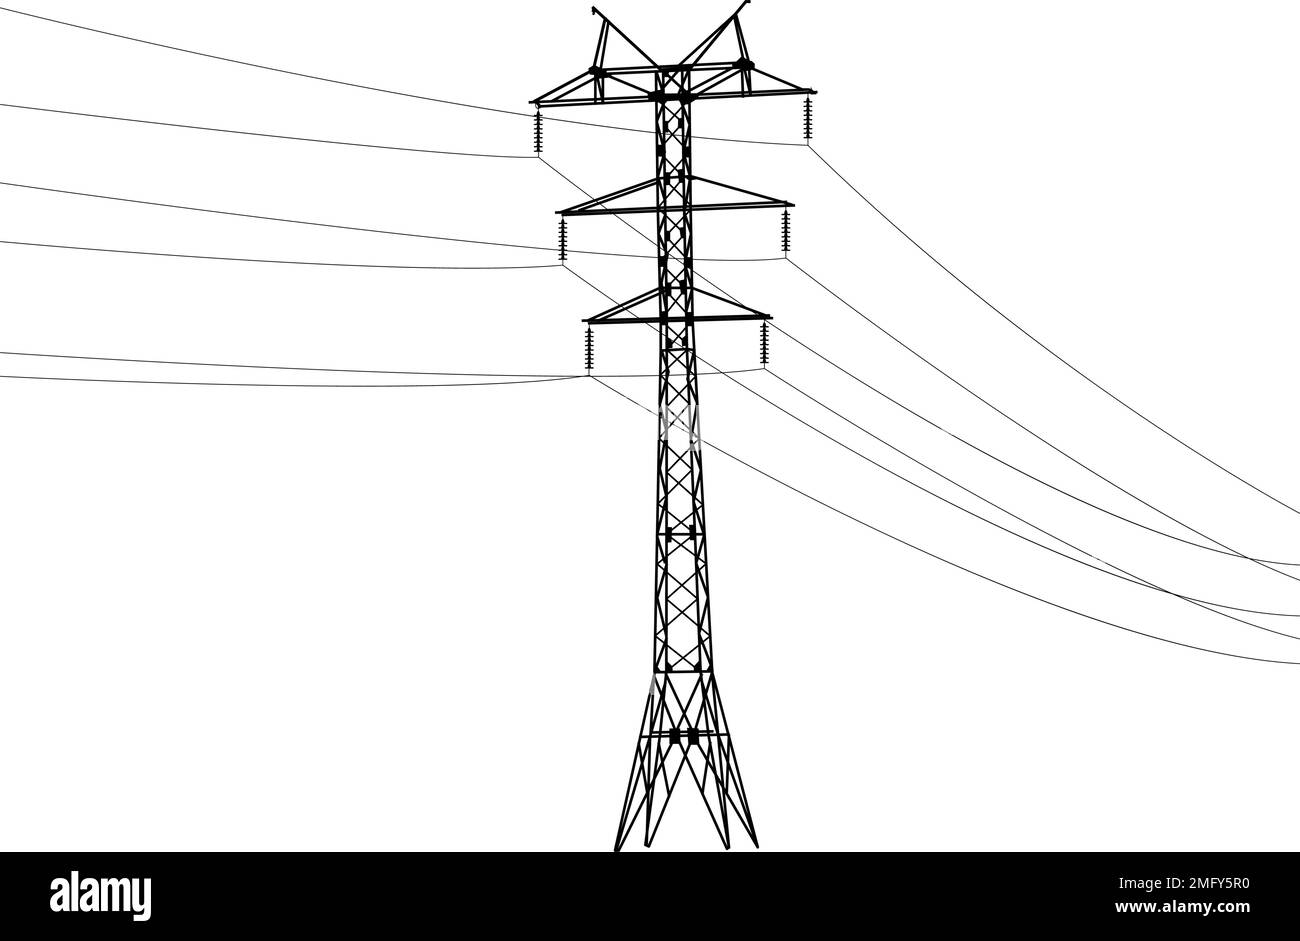 Silhouette of high voltage power lines on a white background. Stock Vector